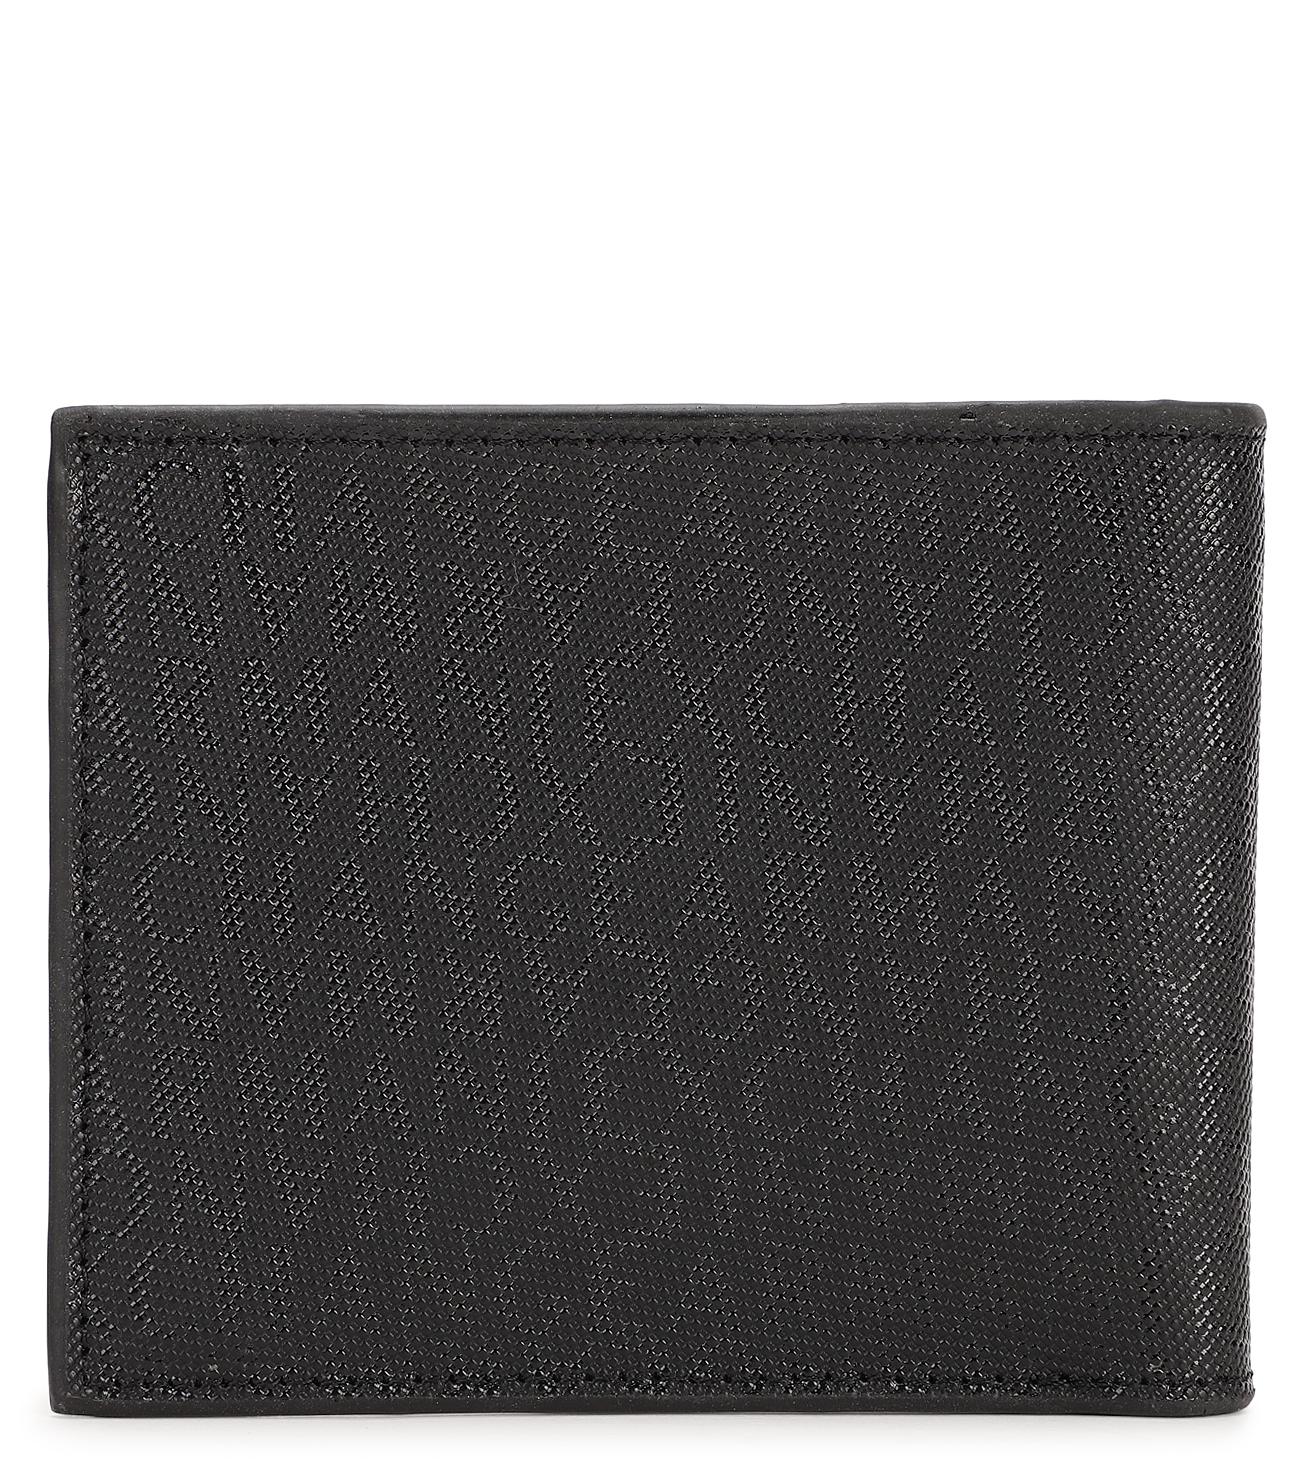 ARMANI EXCHANGE: leather wallet with all over logo - Black | Armani  Exchange wallet 958098 CC349 online at GIGLIO.COM